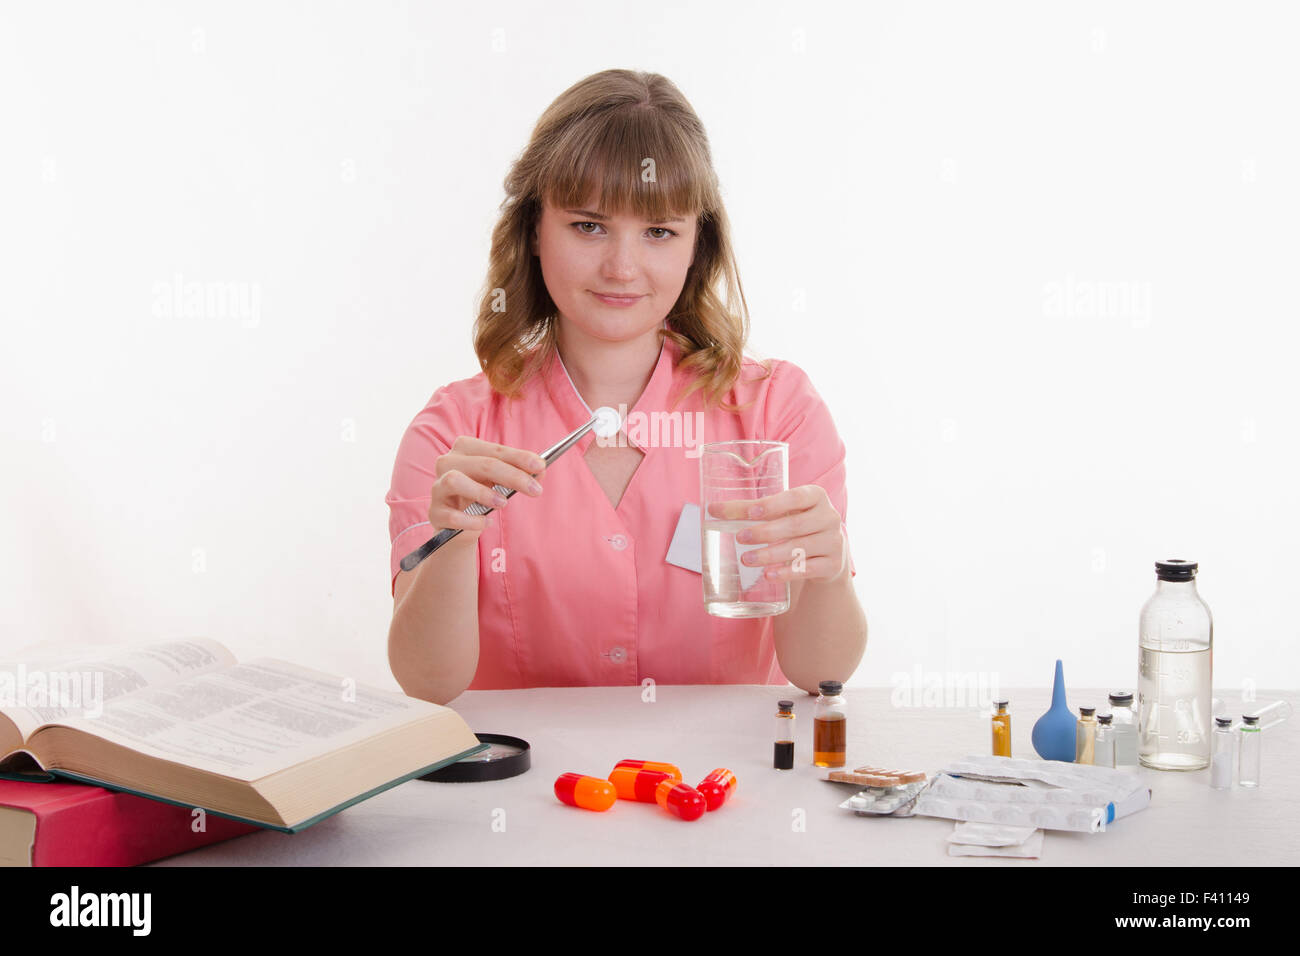 The pharmacist conducts experiments Stock Photo